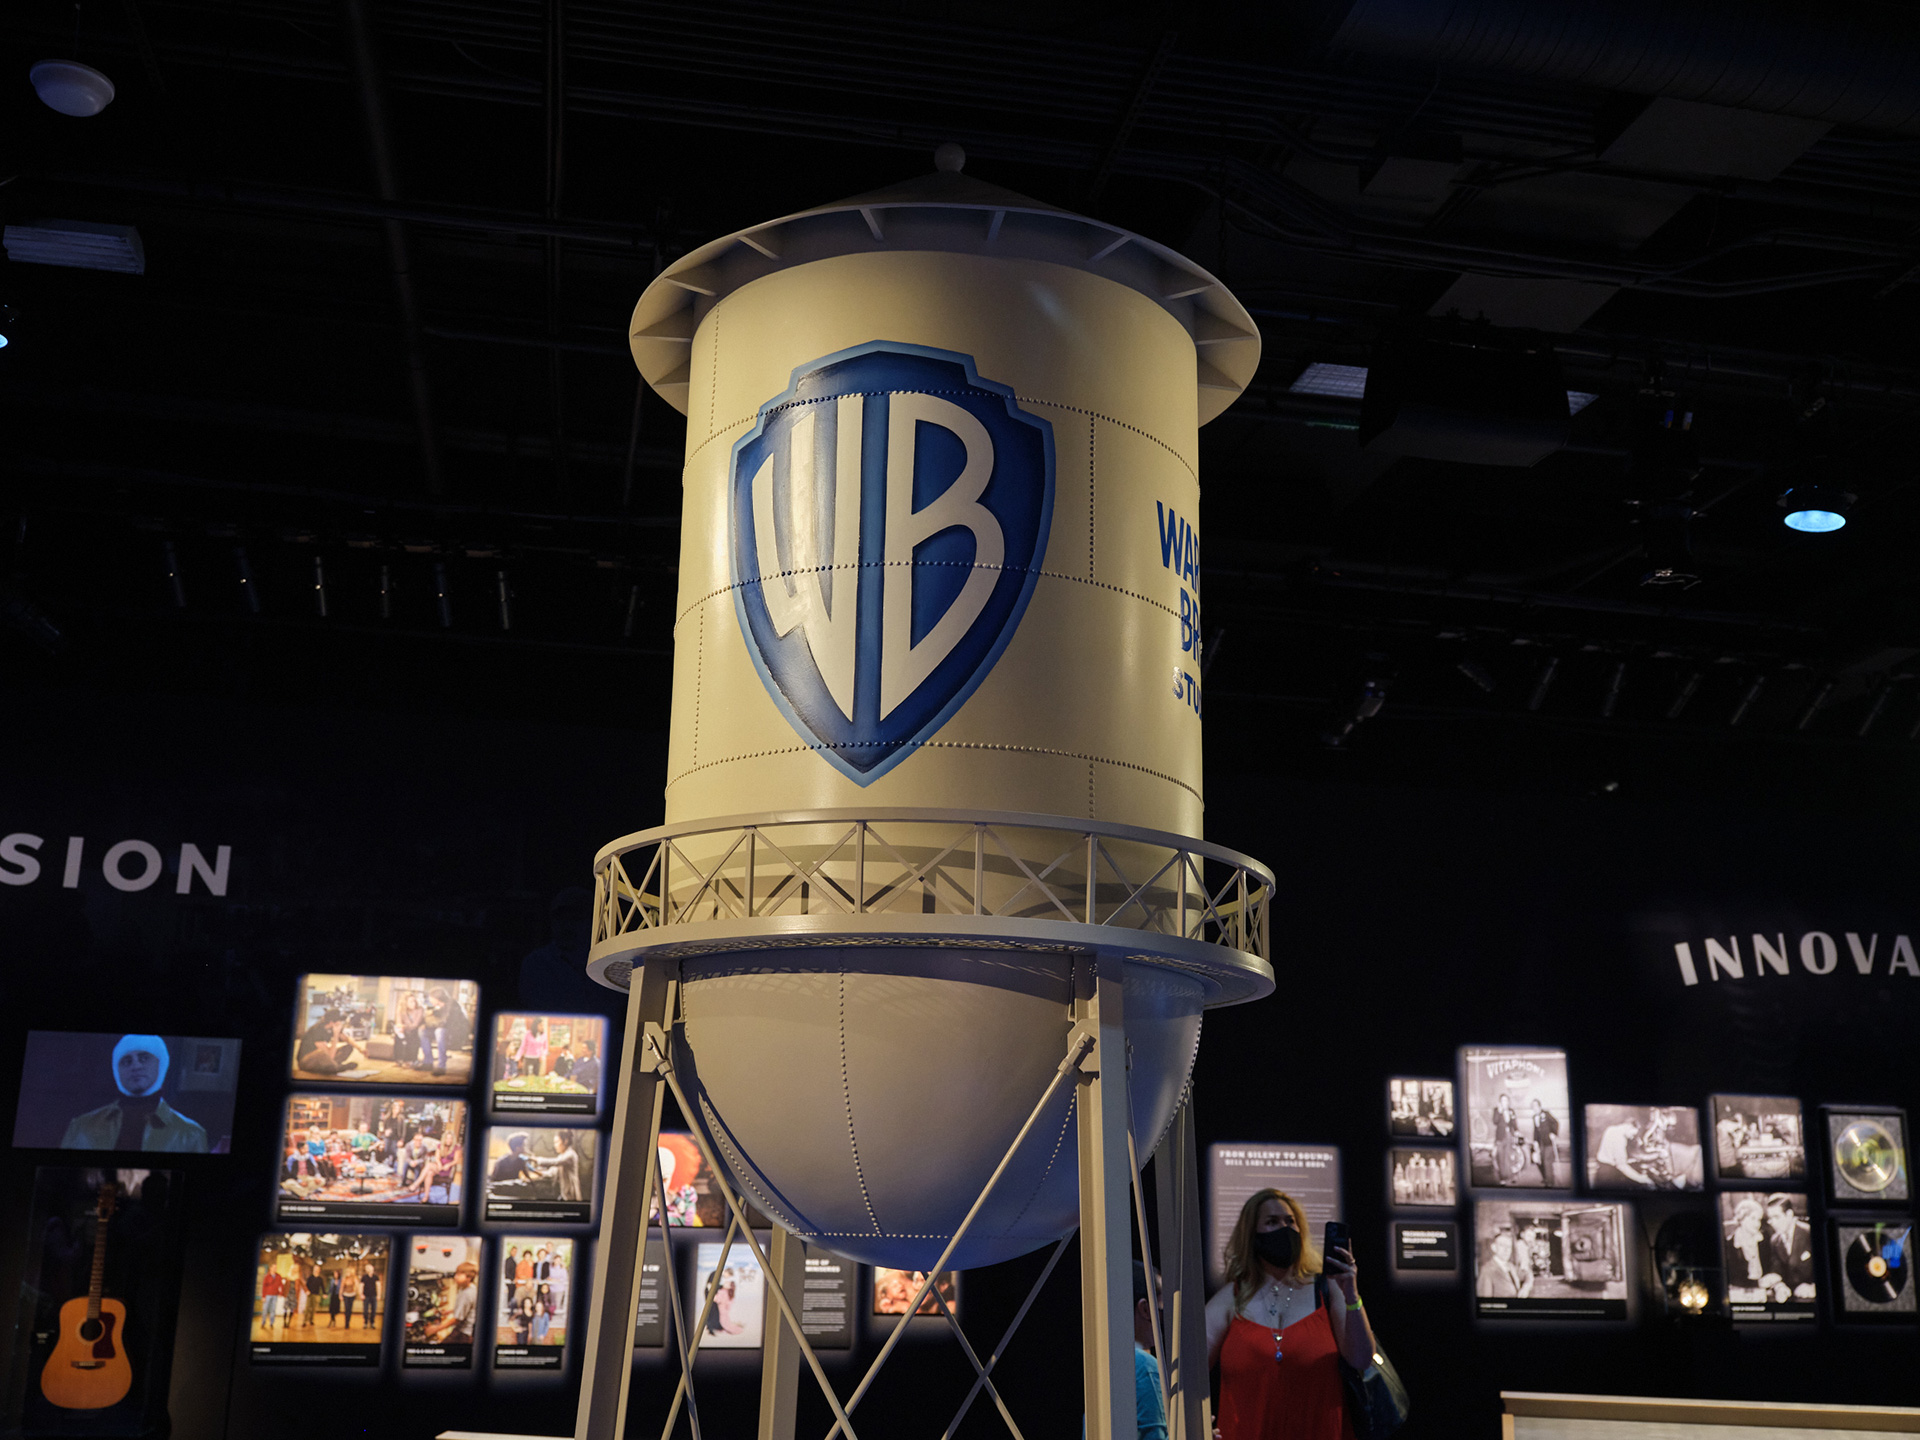 a-local-tour-through-entertainment-history-1-warner-bros-wb-water-tower